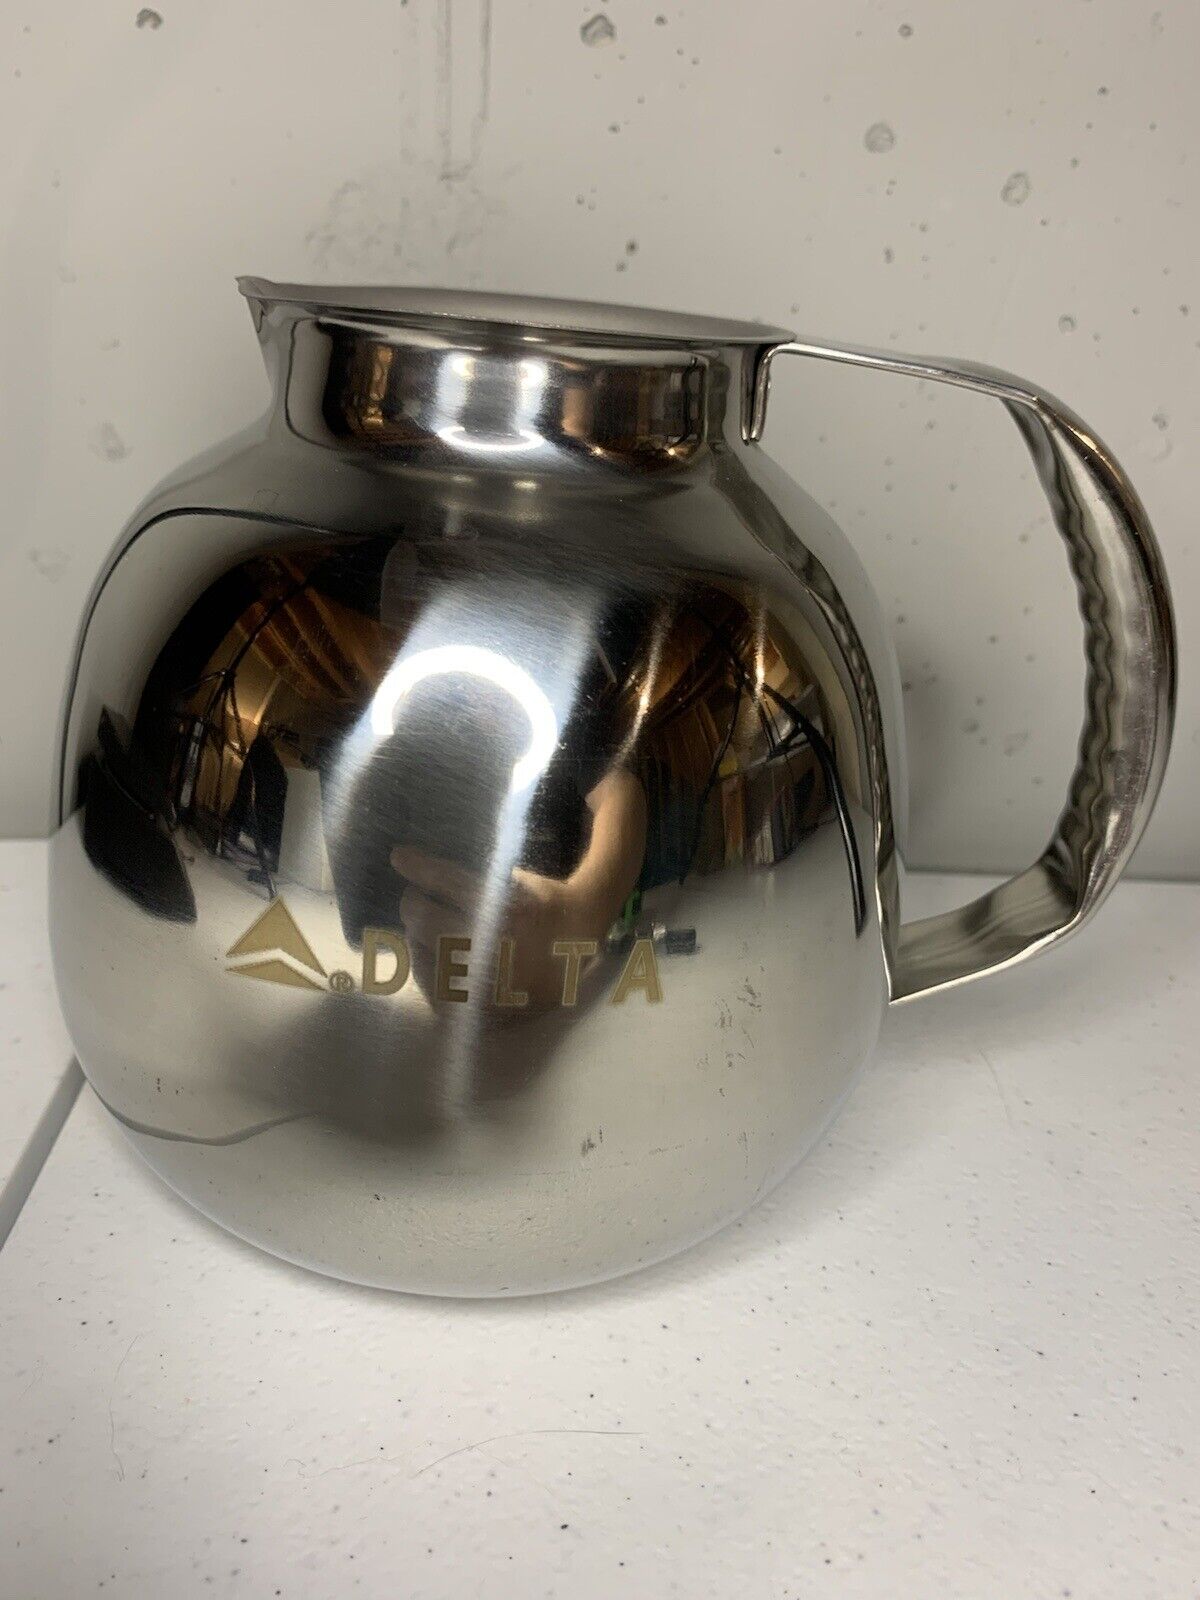 Rare Delta Airlines Engraved Coffee/Tea Pot Stainless Steel 6” First Class